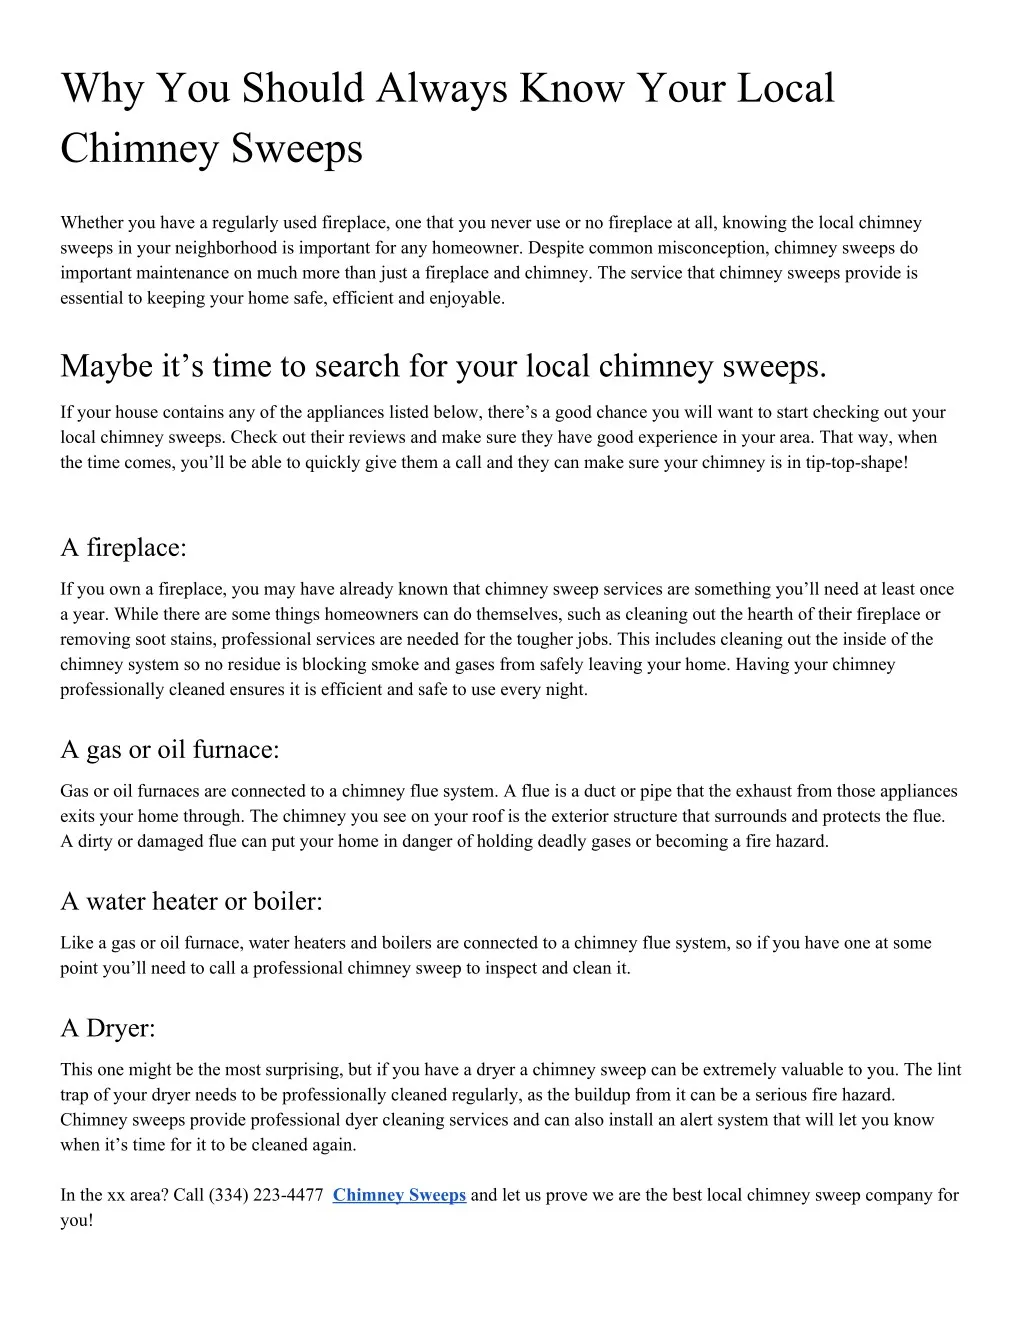 why you should always know your local chimney